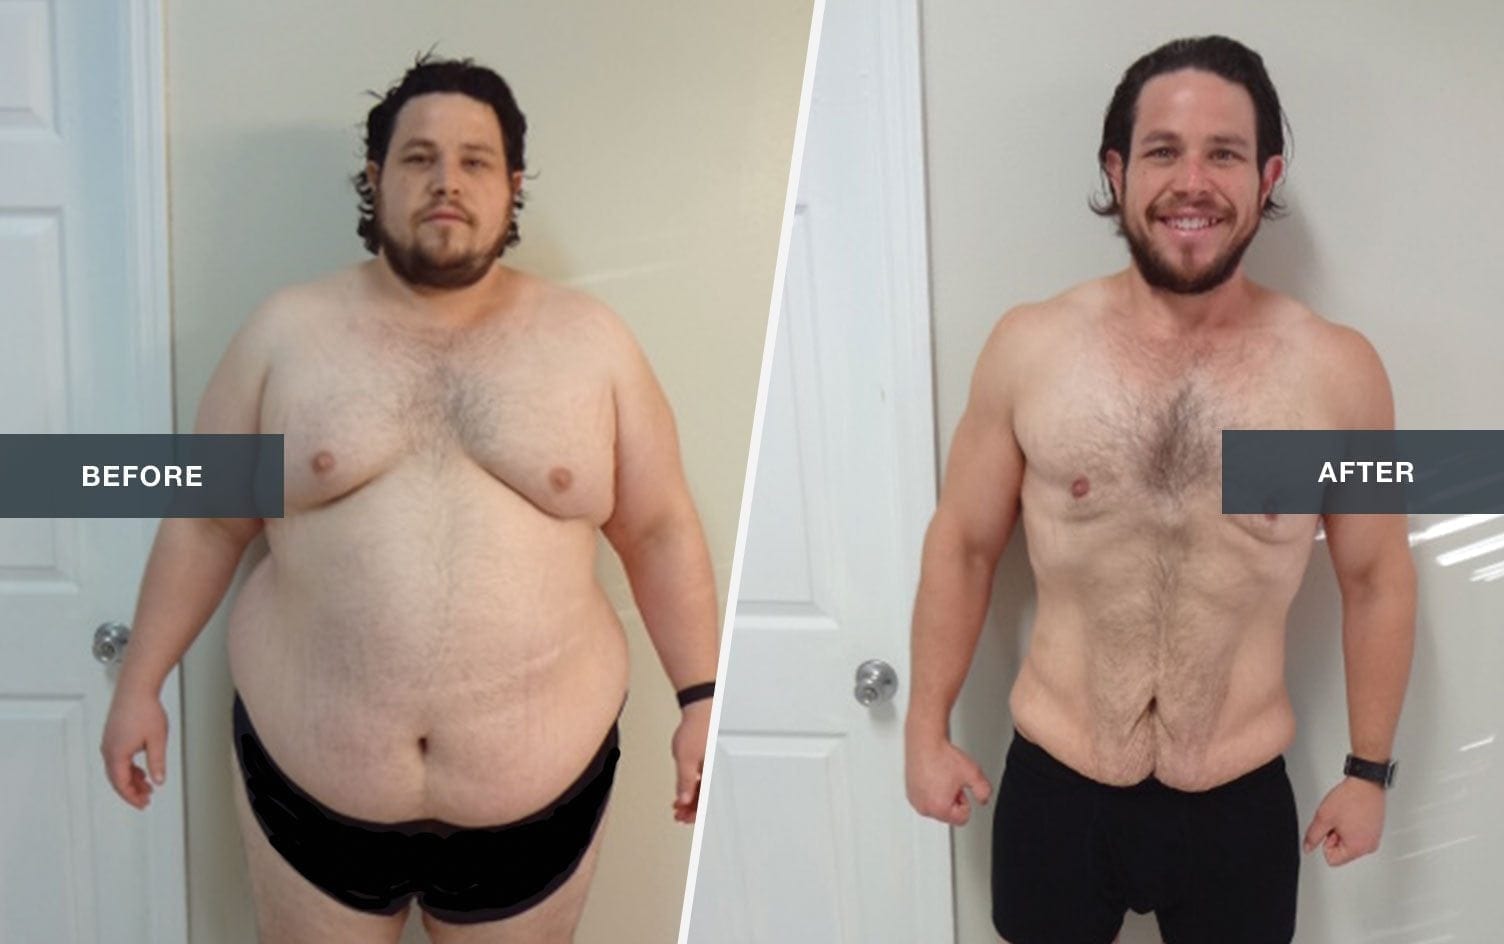 Watch This MyFitnessPal User Lose 176 Pounds Over 2 Years, 1 Photo Per Day.